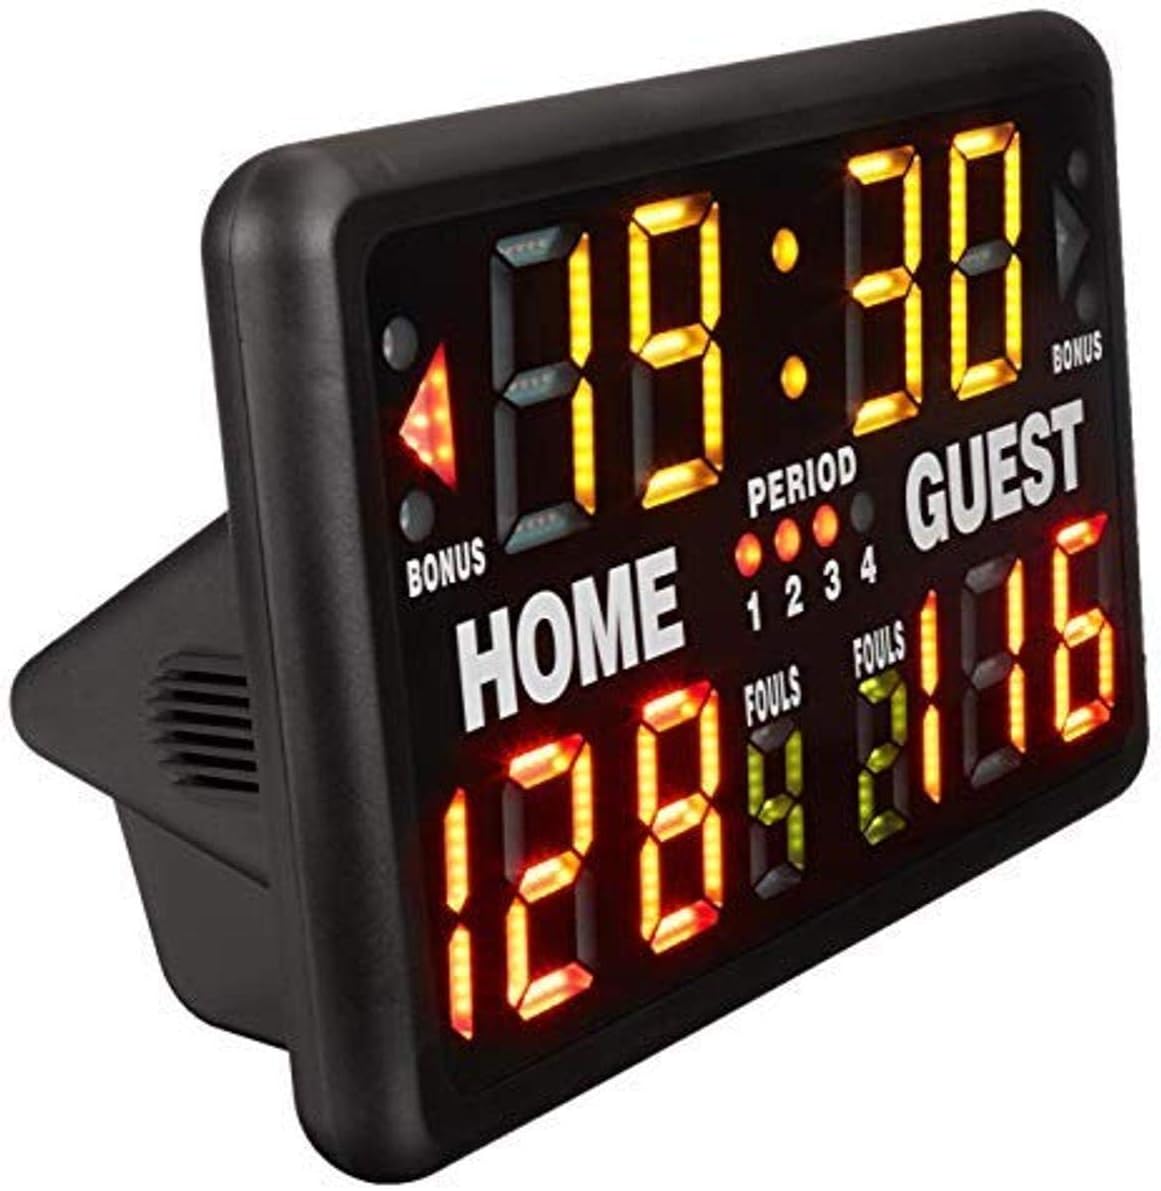 Discover the top 7 portable scoreboards for any budget, ideal for various sports. Our guide includes affordable picks under $300 and highlights key features and limitations to help you choose the best for your needs.